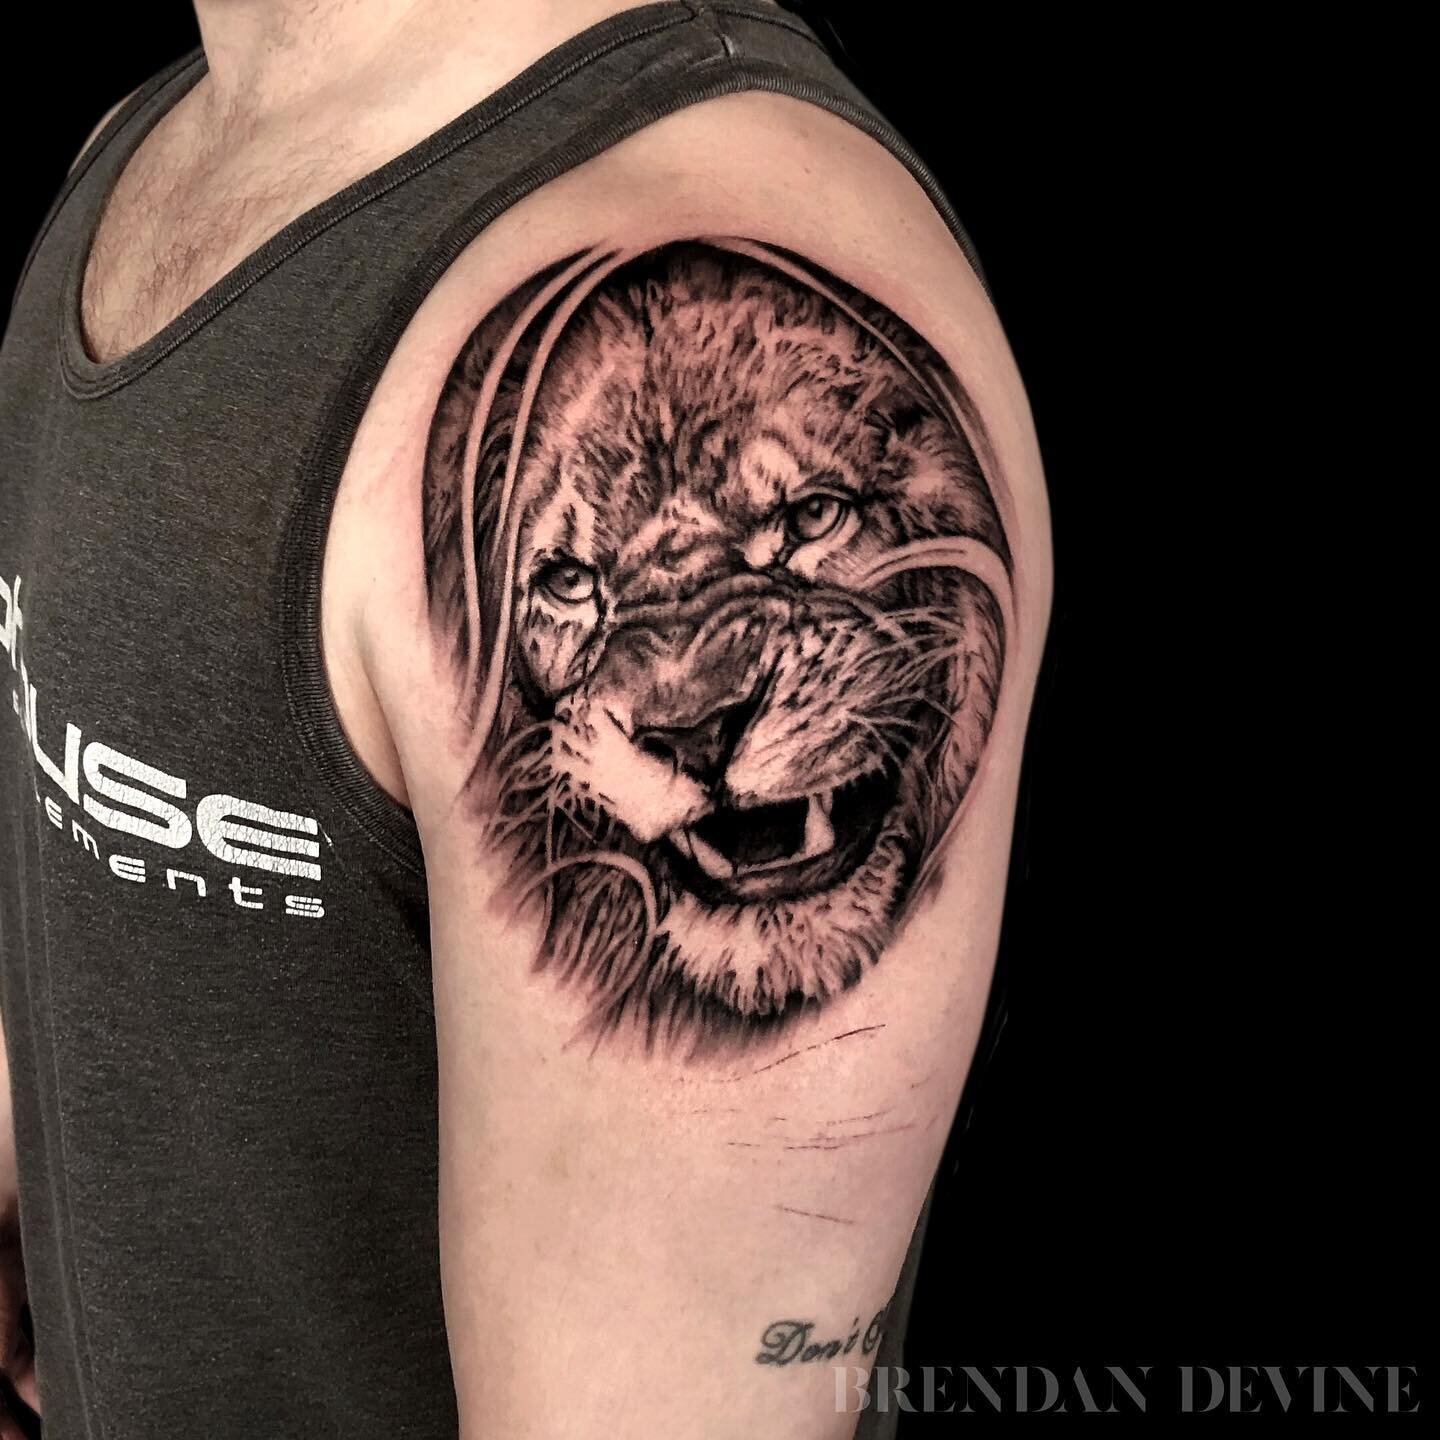 🦁 for my new pal Hunter. Adding onto this in a few weeks. Thanks Hunter!
.
.
.
#liontattoos #liontattoo #lionportrait #blackandgreytattoo #realismtattoo #eikondevice #neotatmachines #neotat #silverbackink #bishopwand #bishoprotary #sullenclothing #s